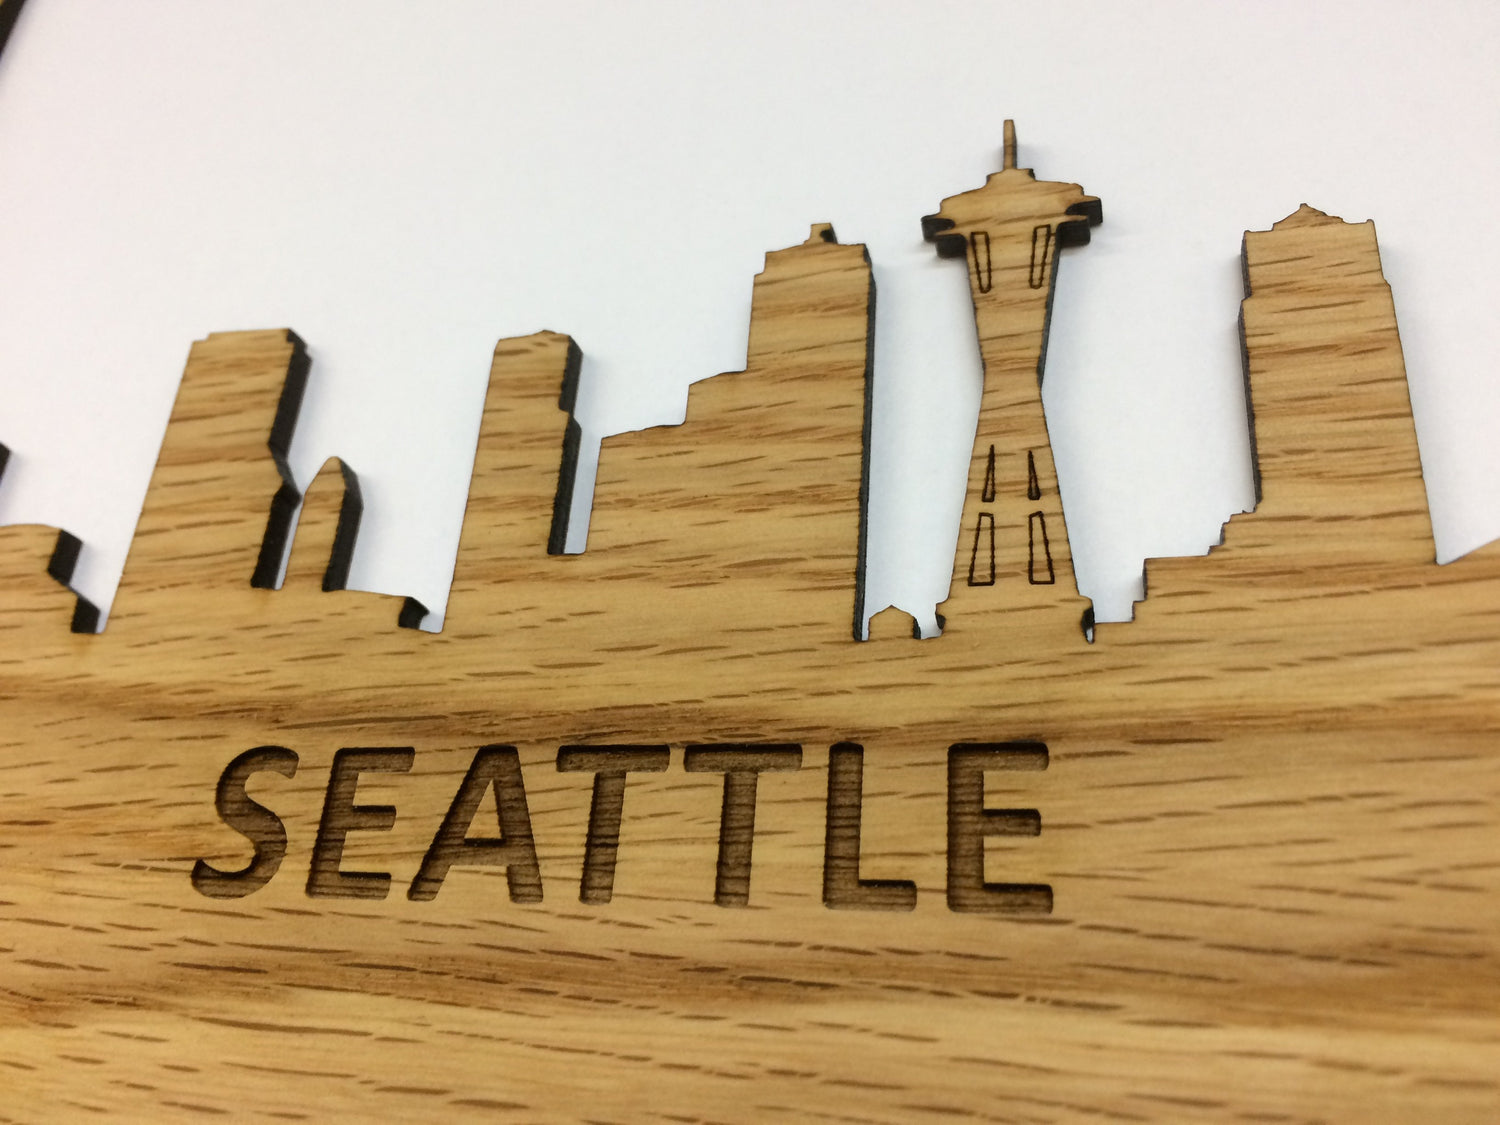 8x10 Seattle Picture Frame, Picture Frame, home decor, laser engraved - Legacy Images